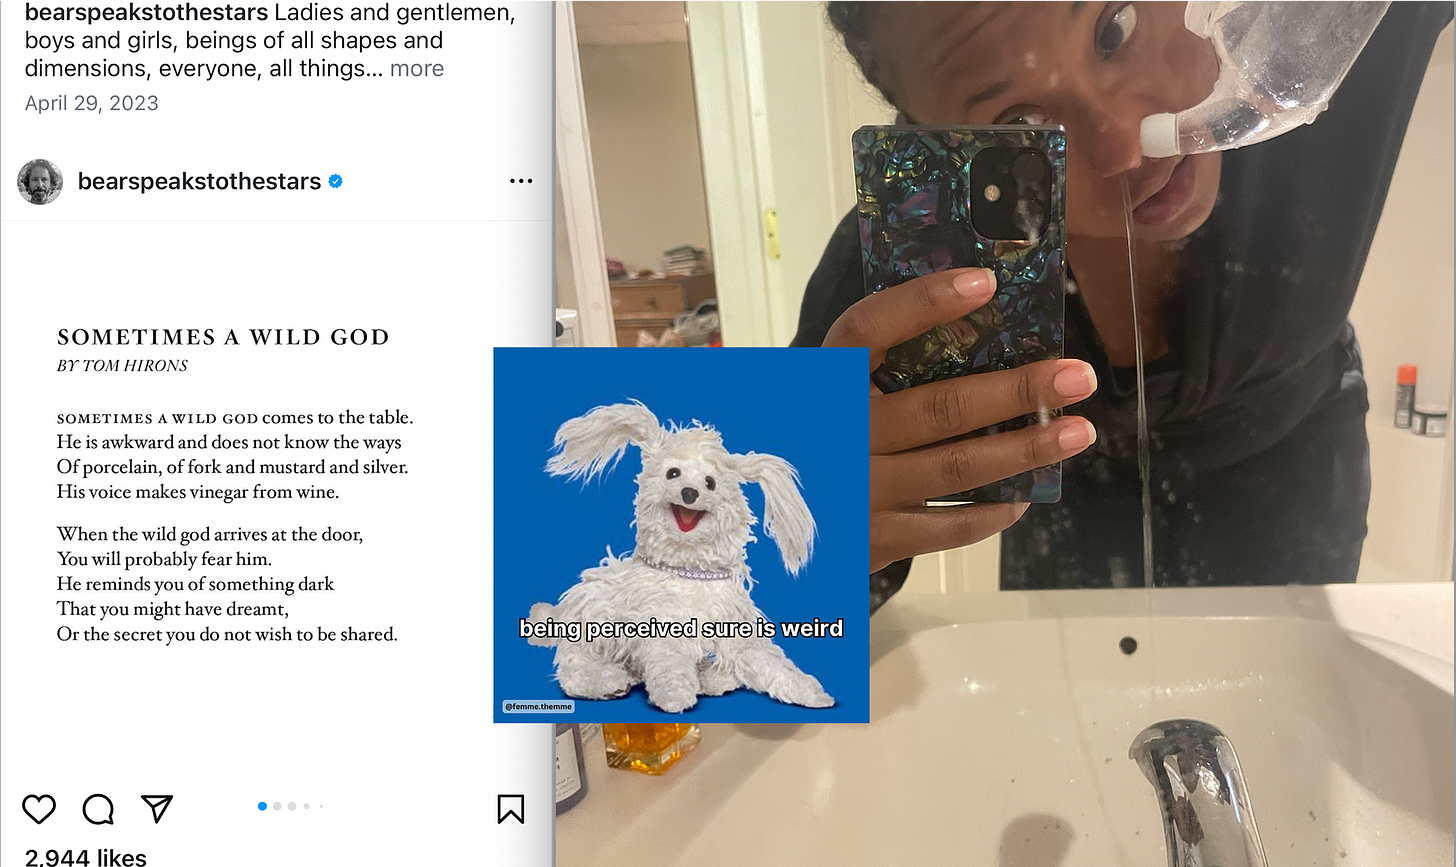 A collage image of an instagram screen shot with a poem called "sometimes a wild god" by tom hirons on the left. On the right is an image of Kia in a black jumpsuit, leaned over a bathroom sink and taking a selfie while water pours through her nose from a clear plastic neti pot. On the bottom, on a small blue background, is the image of a scraggly and happy stuffed animal dog, with text written over it "being perceived sure is weird."